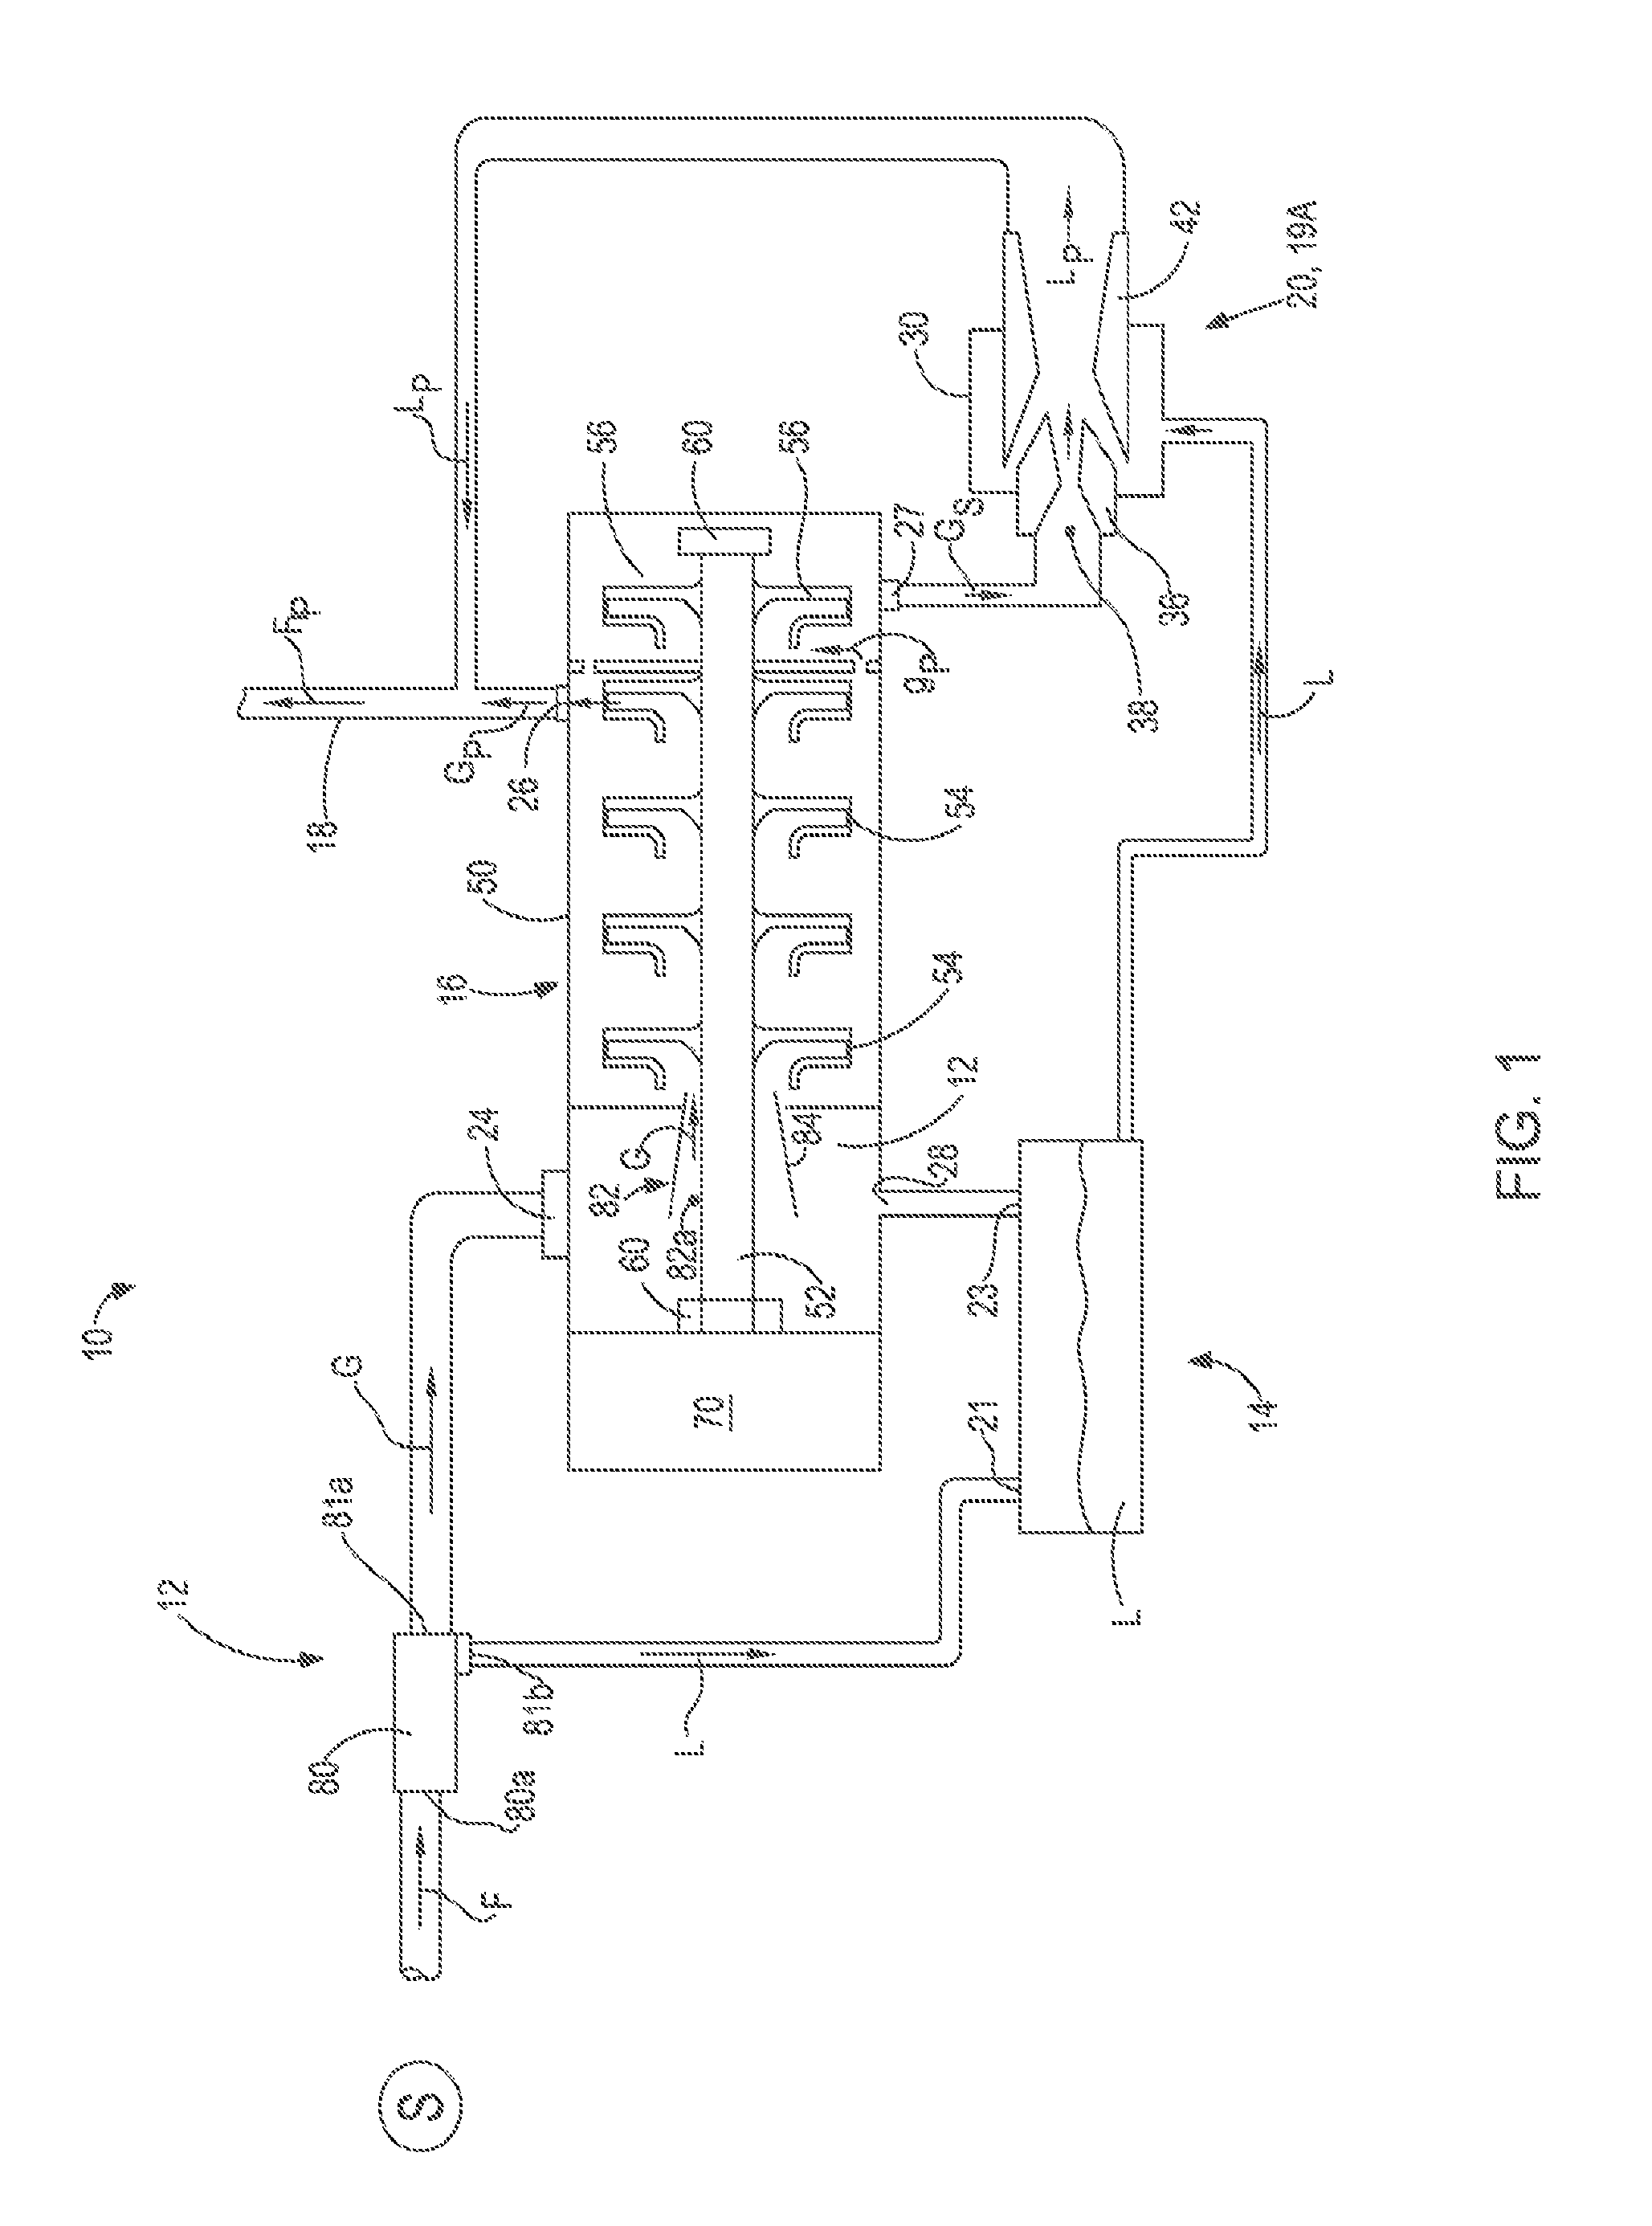 Compressor assembly including separator and ejector pump